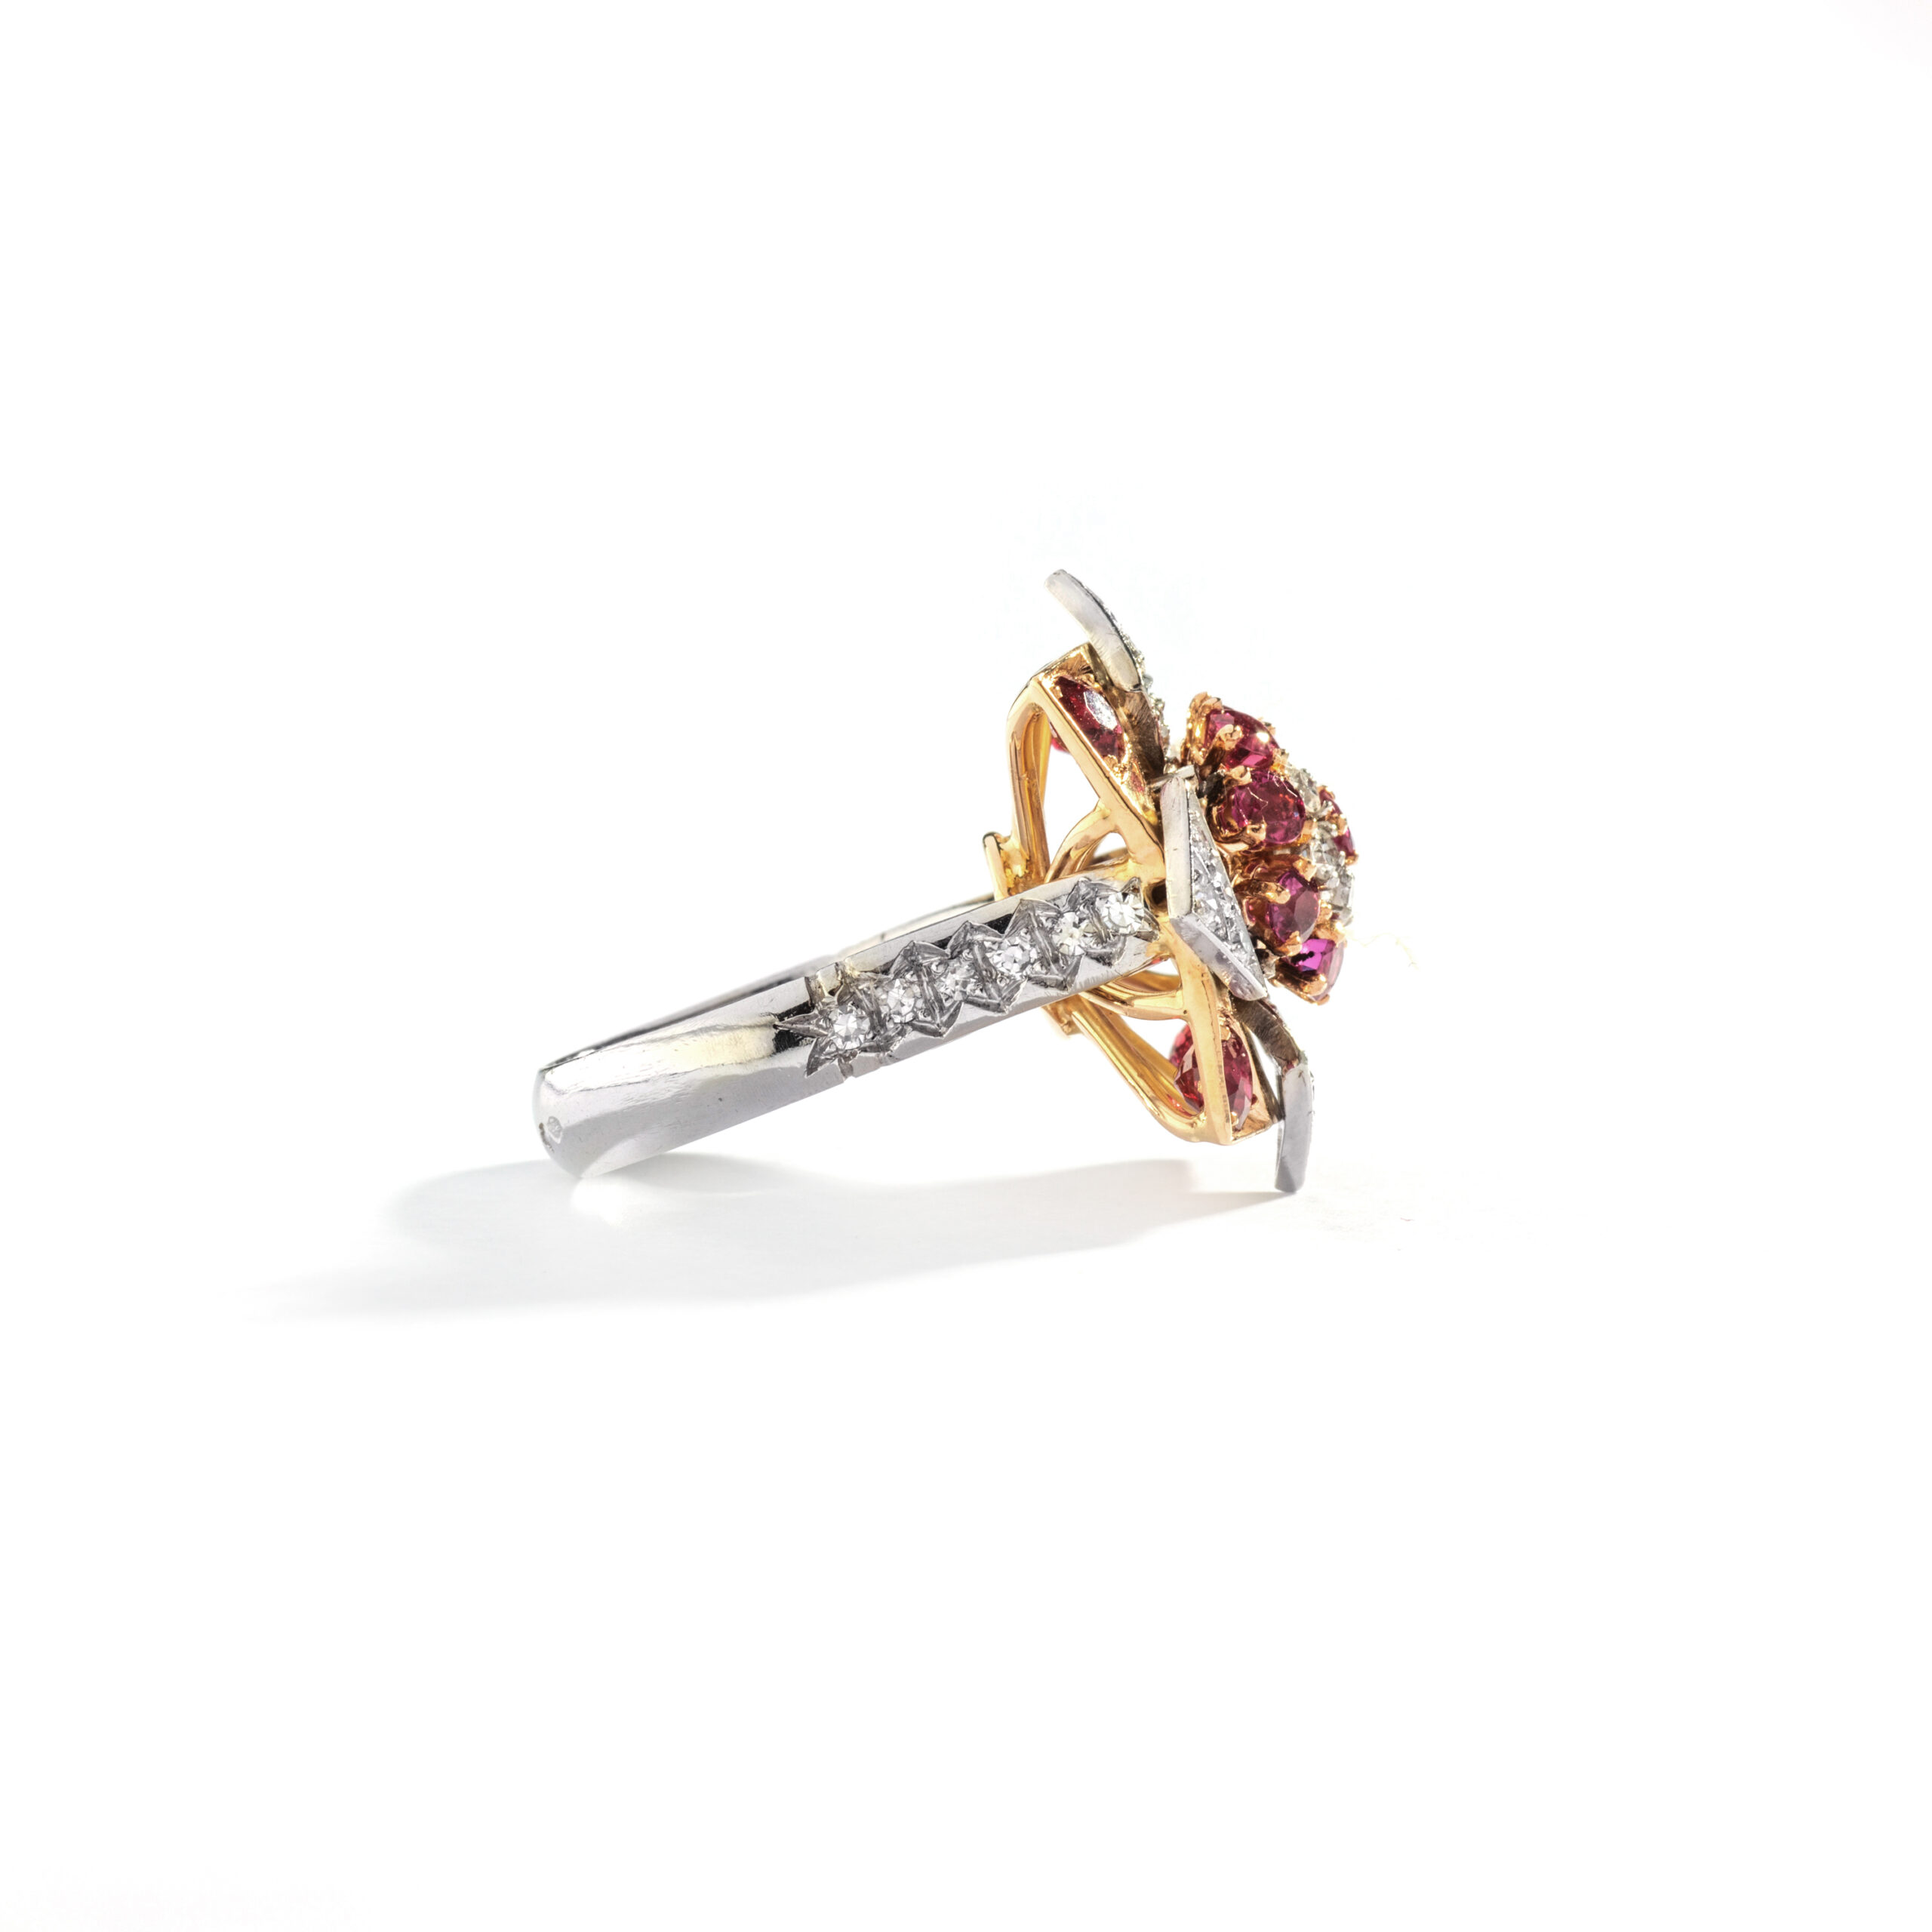 French ruby diamond yellow gold ring